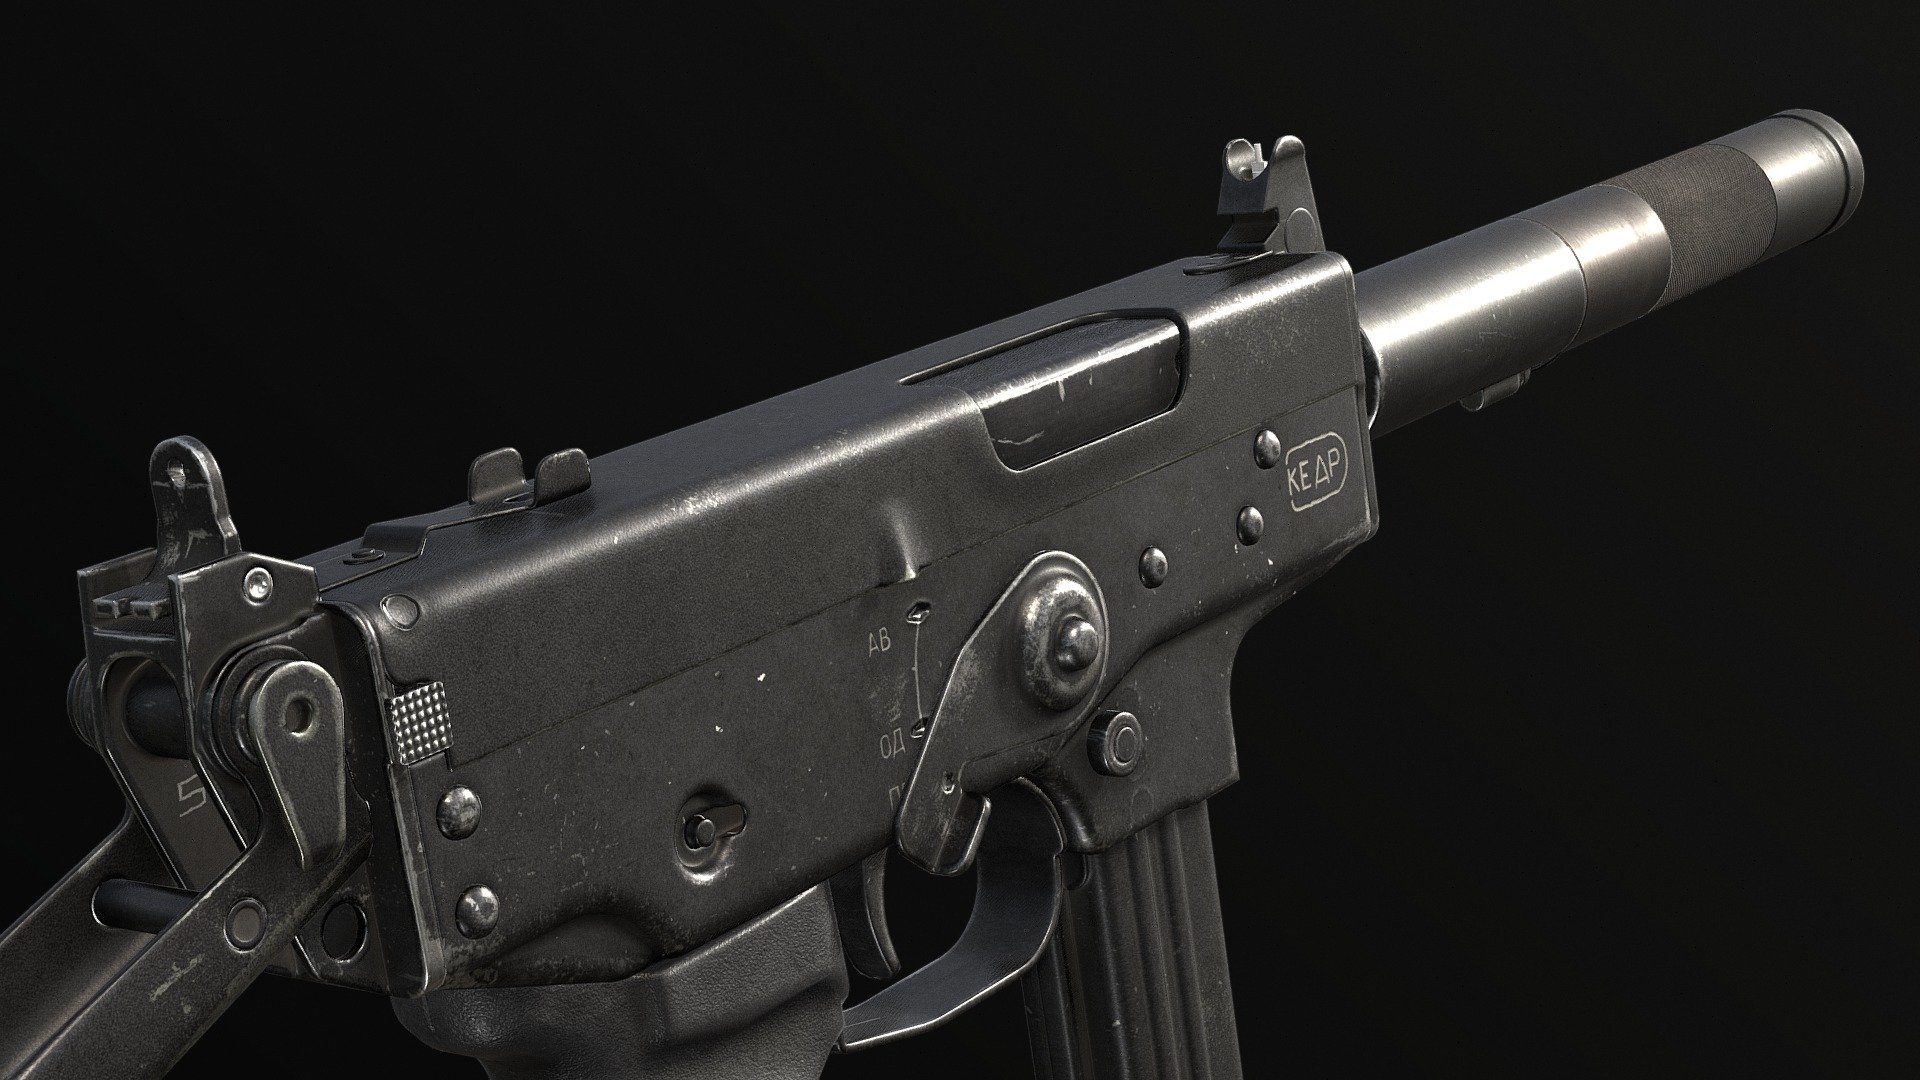 The PP-91 is a simply designed, easy to manufacture selective fire submachine gun designed by Yevgeny Dragunov (the designer of the SVD sniper rifle).

It is blowback operated and fires from a closed bolt, allowing for more accurate shooting than would be possible from an open bolt design. Ammunition is fed from a double column box magazine and it is supplied with folding shoulder stock.

Despite the small caliber of the round it uses, the notable advantages of the PP-91 are its compact size and the weight of only 1.5 kg, making it very easy to carry, and can be fired effectively by only one hand. The safety/selector lever is located on the right hand side and allows for semi-automatic single shots and fully automatic fire at the rate of 800 rounds per minute. The effective range of the PP-91 is between 50-100m. The weapon uses a diopter sight and allows for the use of a laser sight and a suppressor.

Modeled in Blender 2.93
Textured in Substance Painter
Made for Small Indie Company (We The People) - PP-91-01 Kedr-B - 3D model by SeveN (@SeveN-Models) 3d model